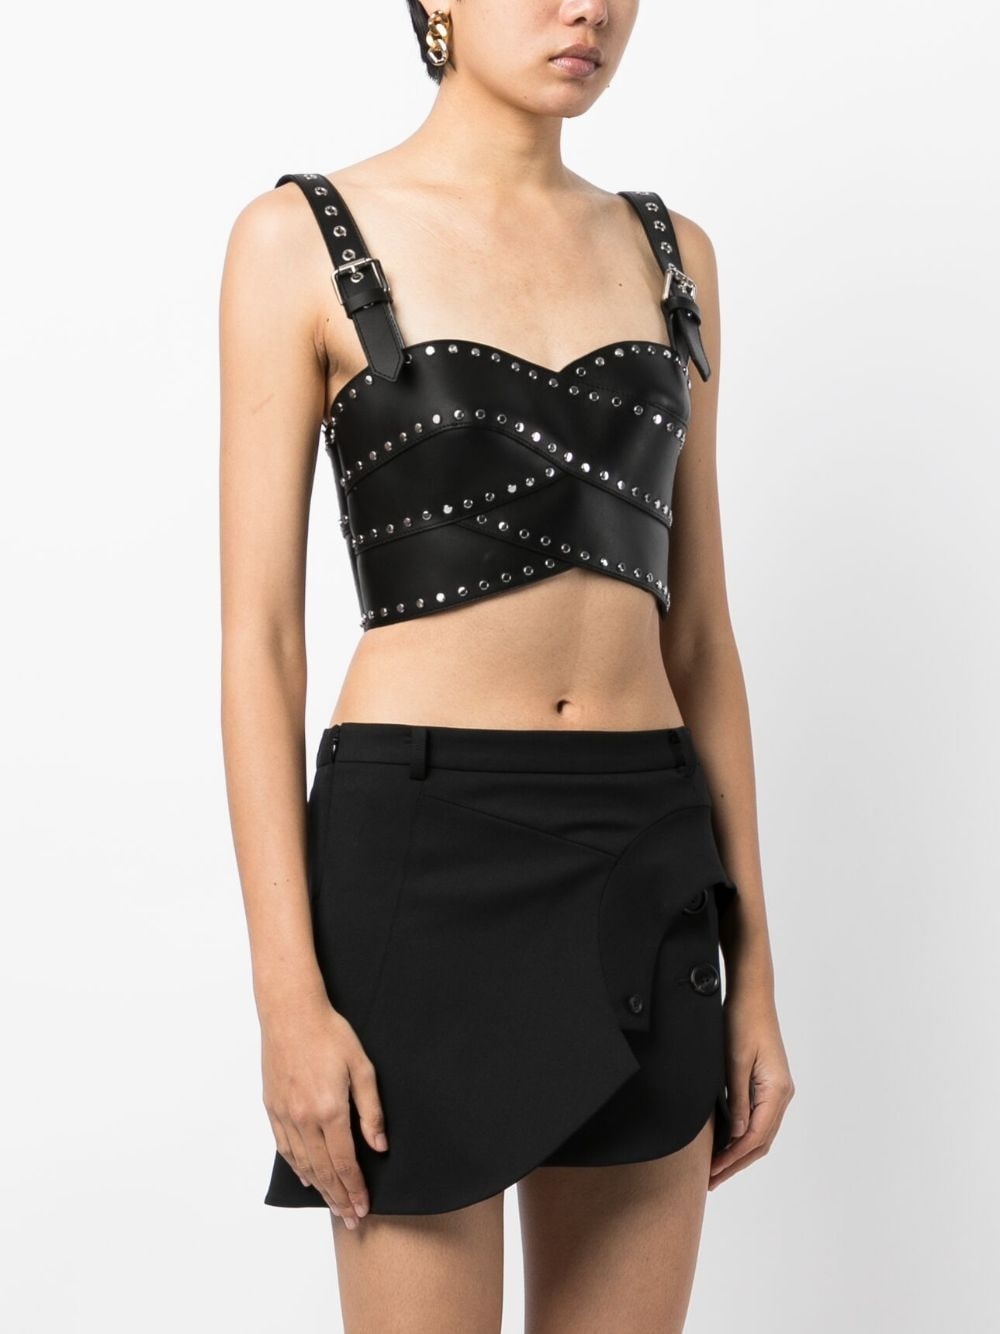 stud-detail leather bustier top - 3